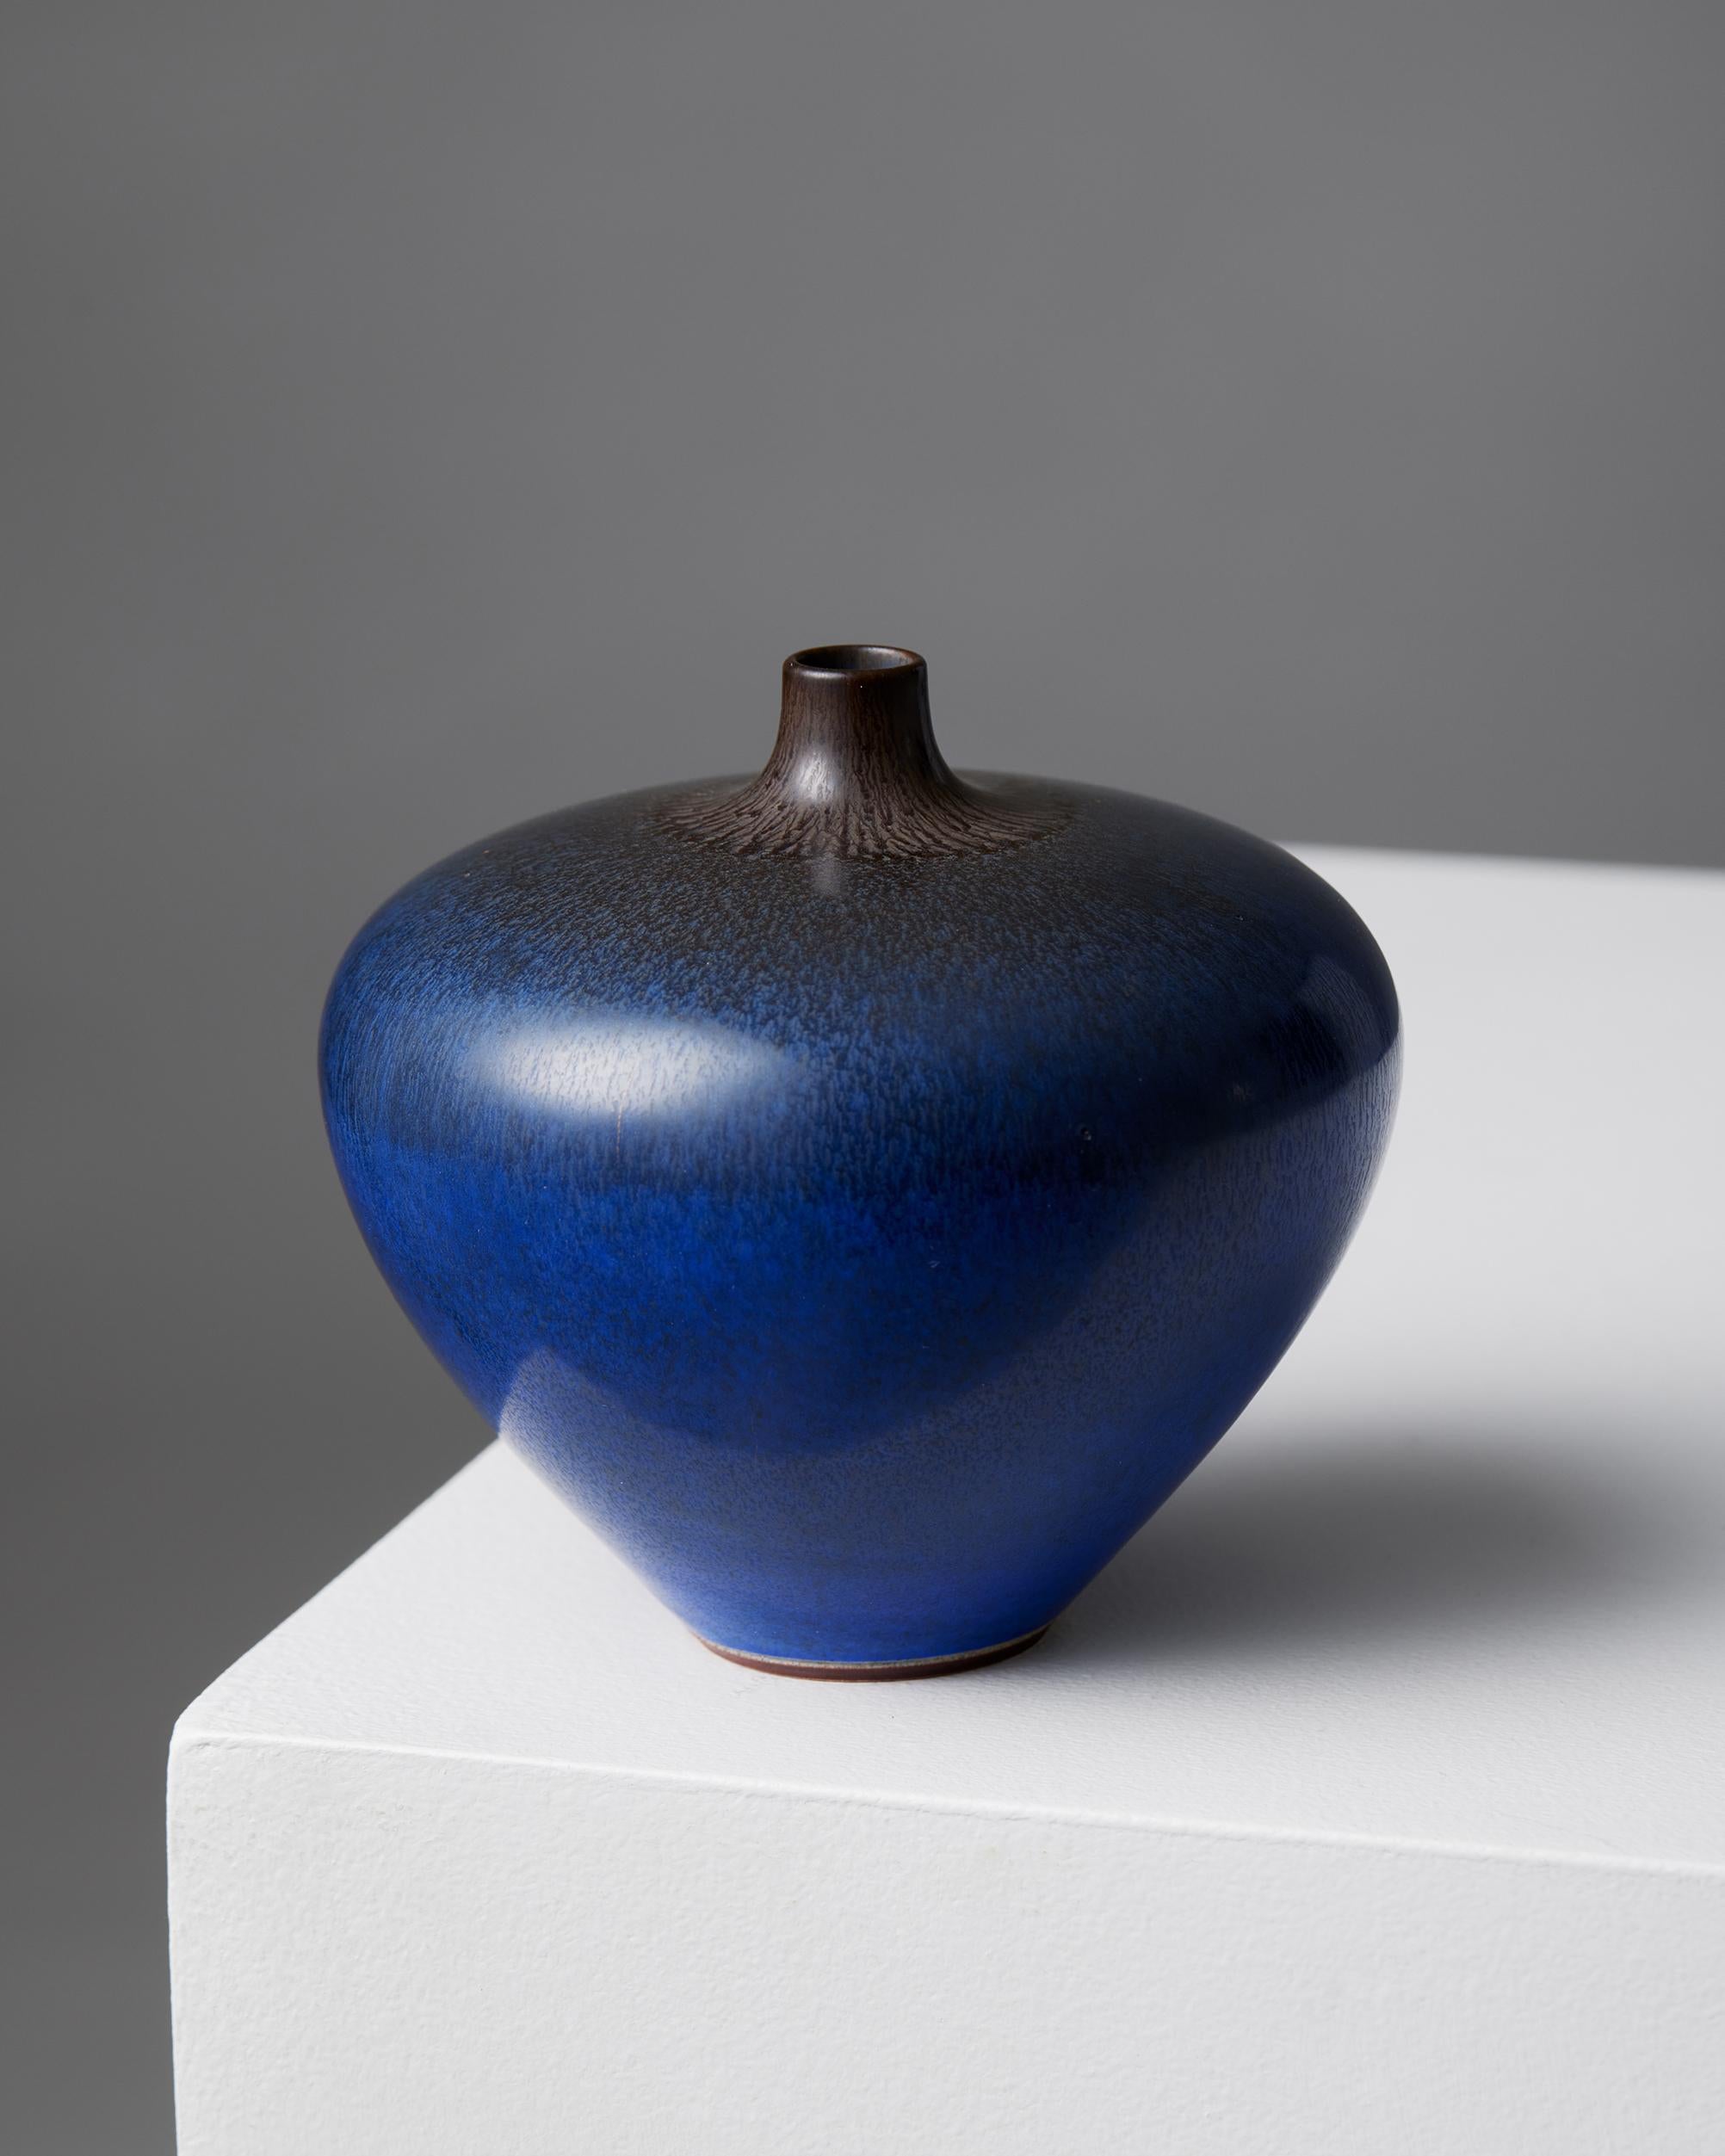 Vase by Berndt Friberg for Gustavsberg,
Sweden, 1954.

Stoneware.

Signed.

Berndt Friberg was born in the southern Sweden town of Hoganas. He came from a long line of ceramists, in an area steeped in the tradition of finely crafted pottery. Berndt